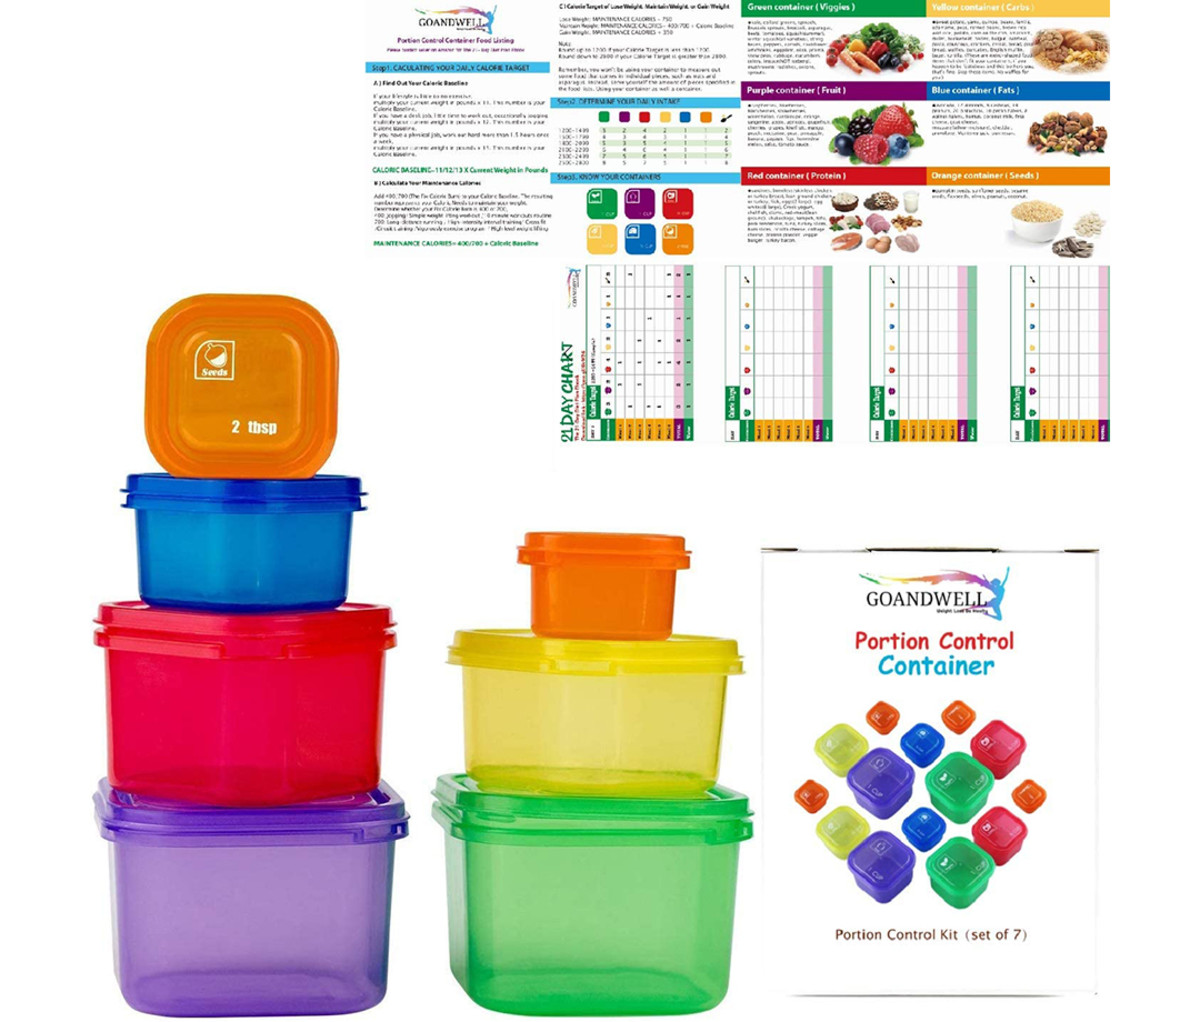 GOANDWELL Portion Control Container Kit